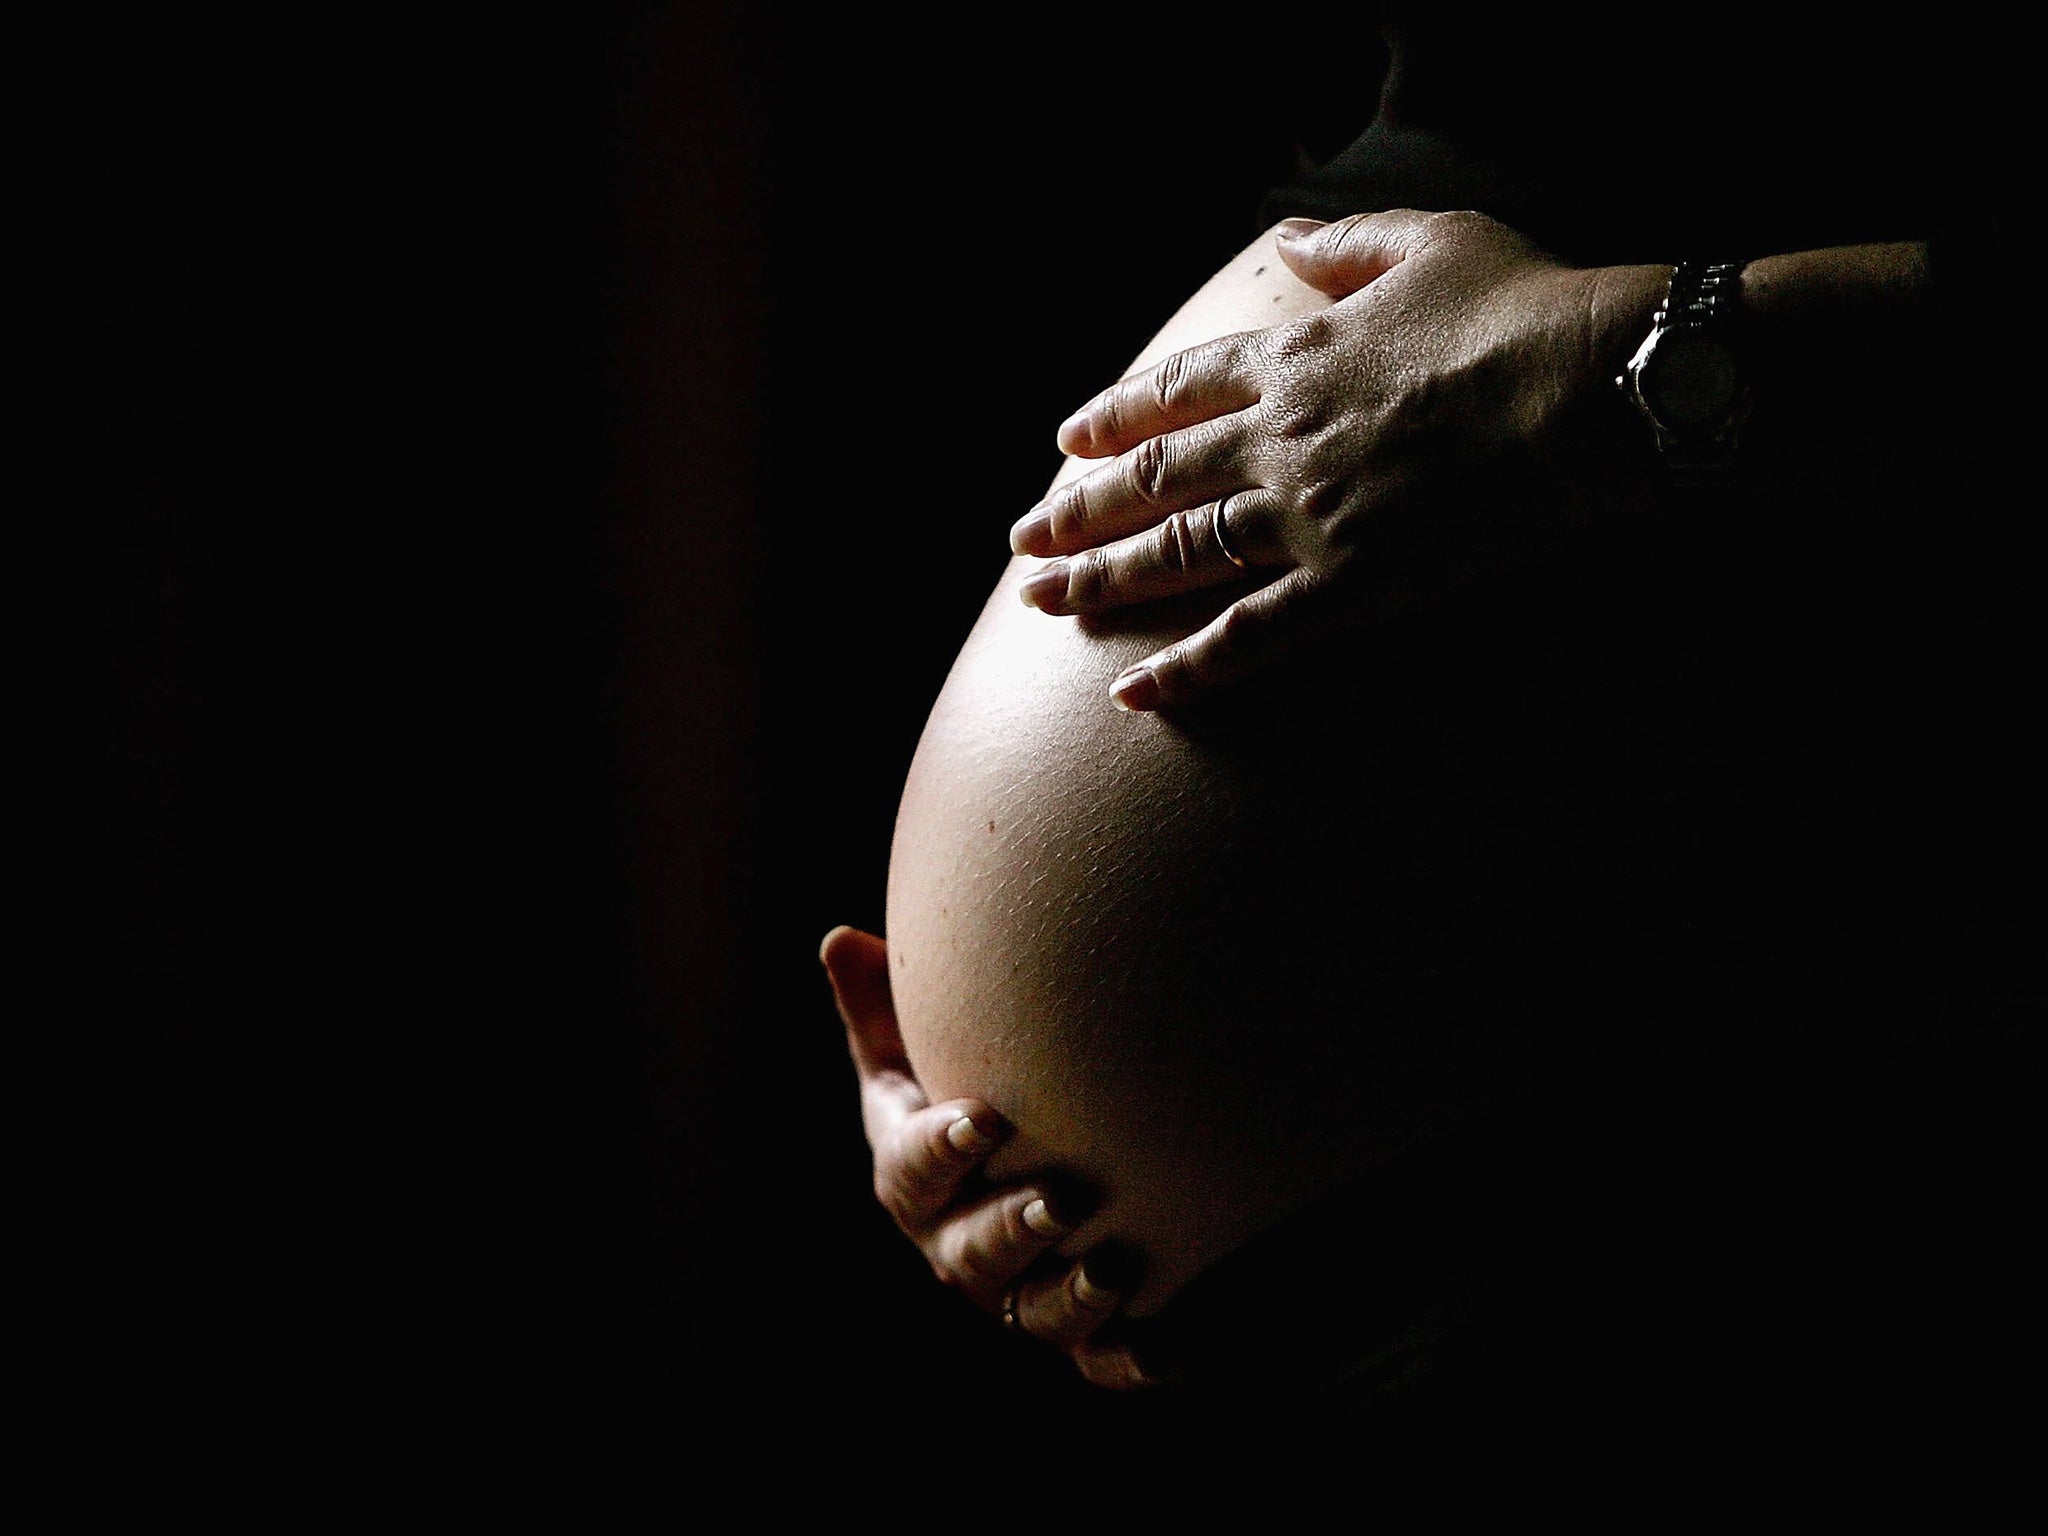 65 per cent of women acheived a live birth by the sixth cycle